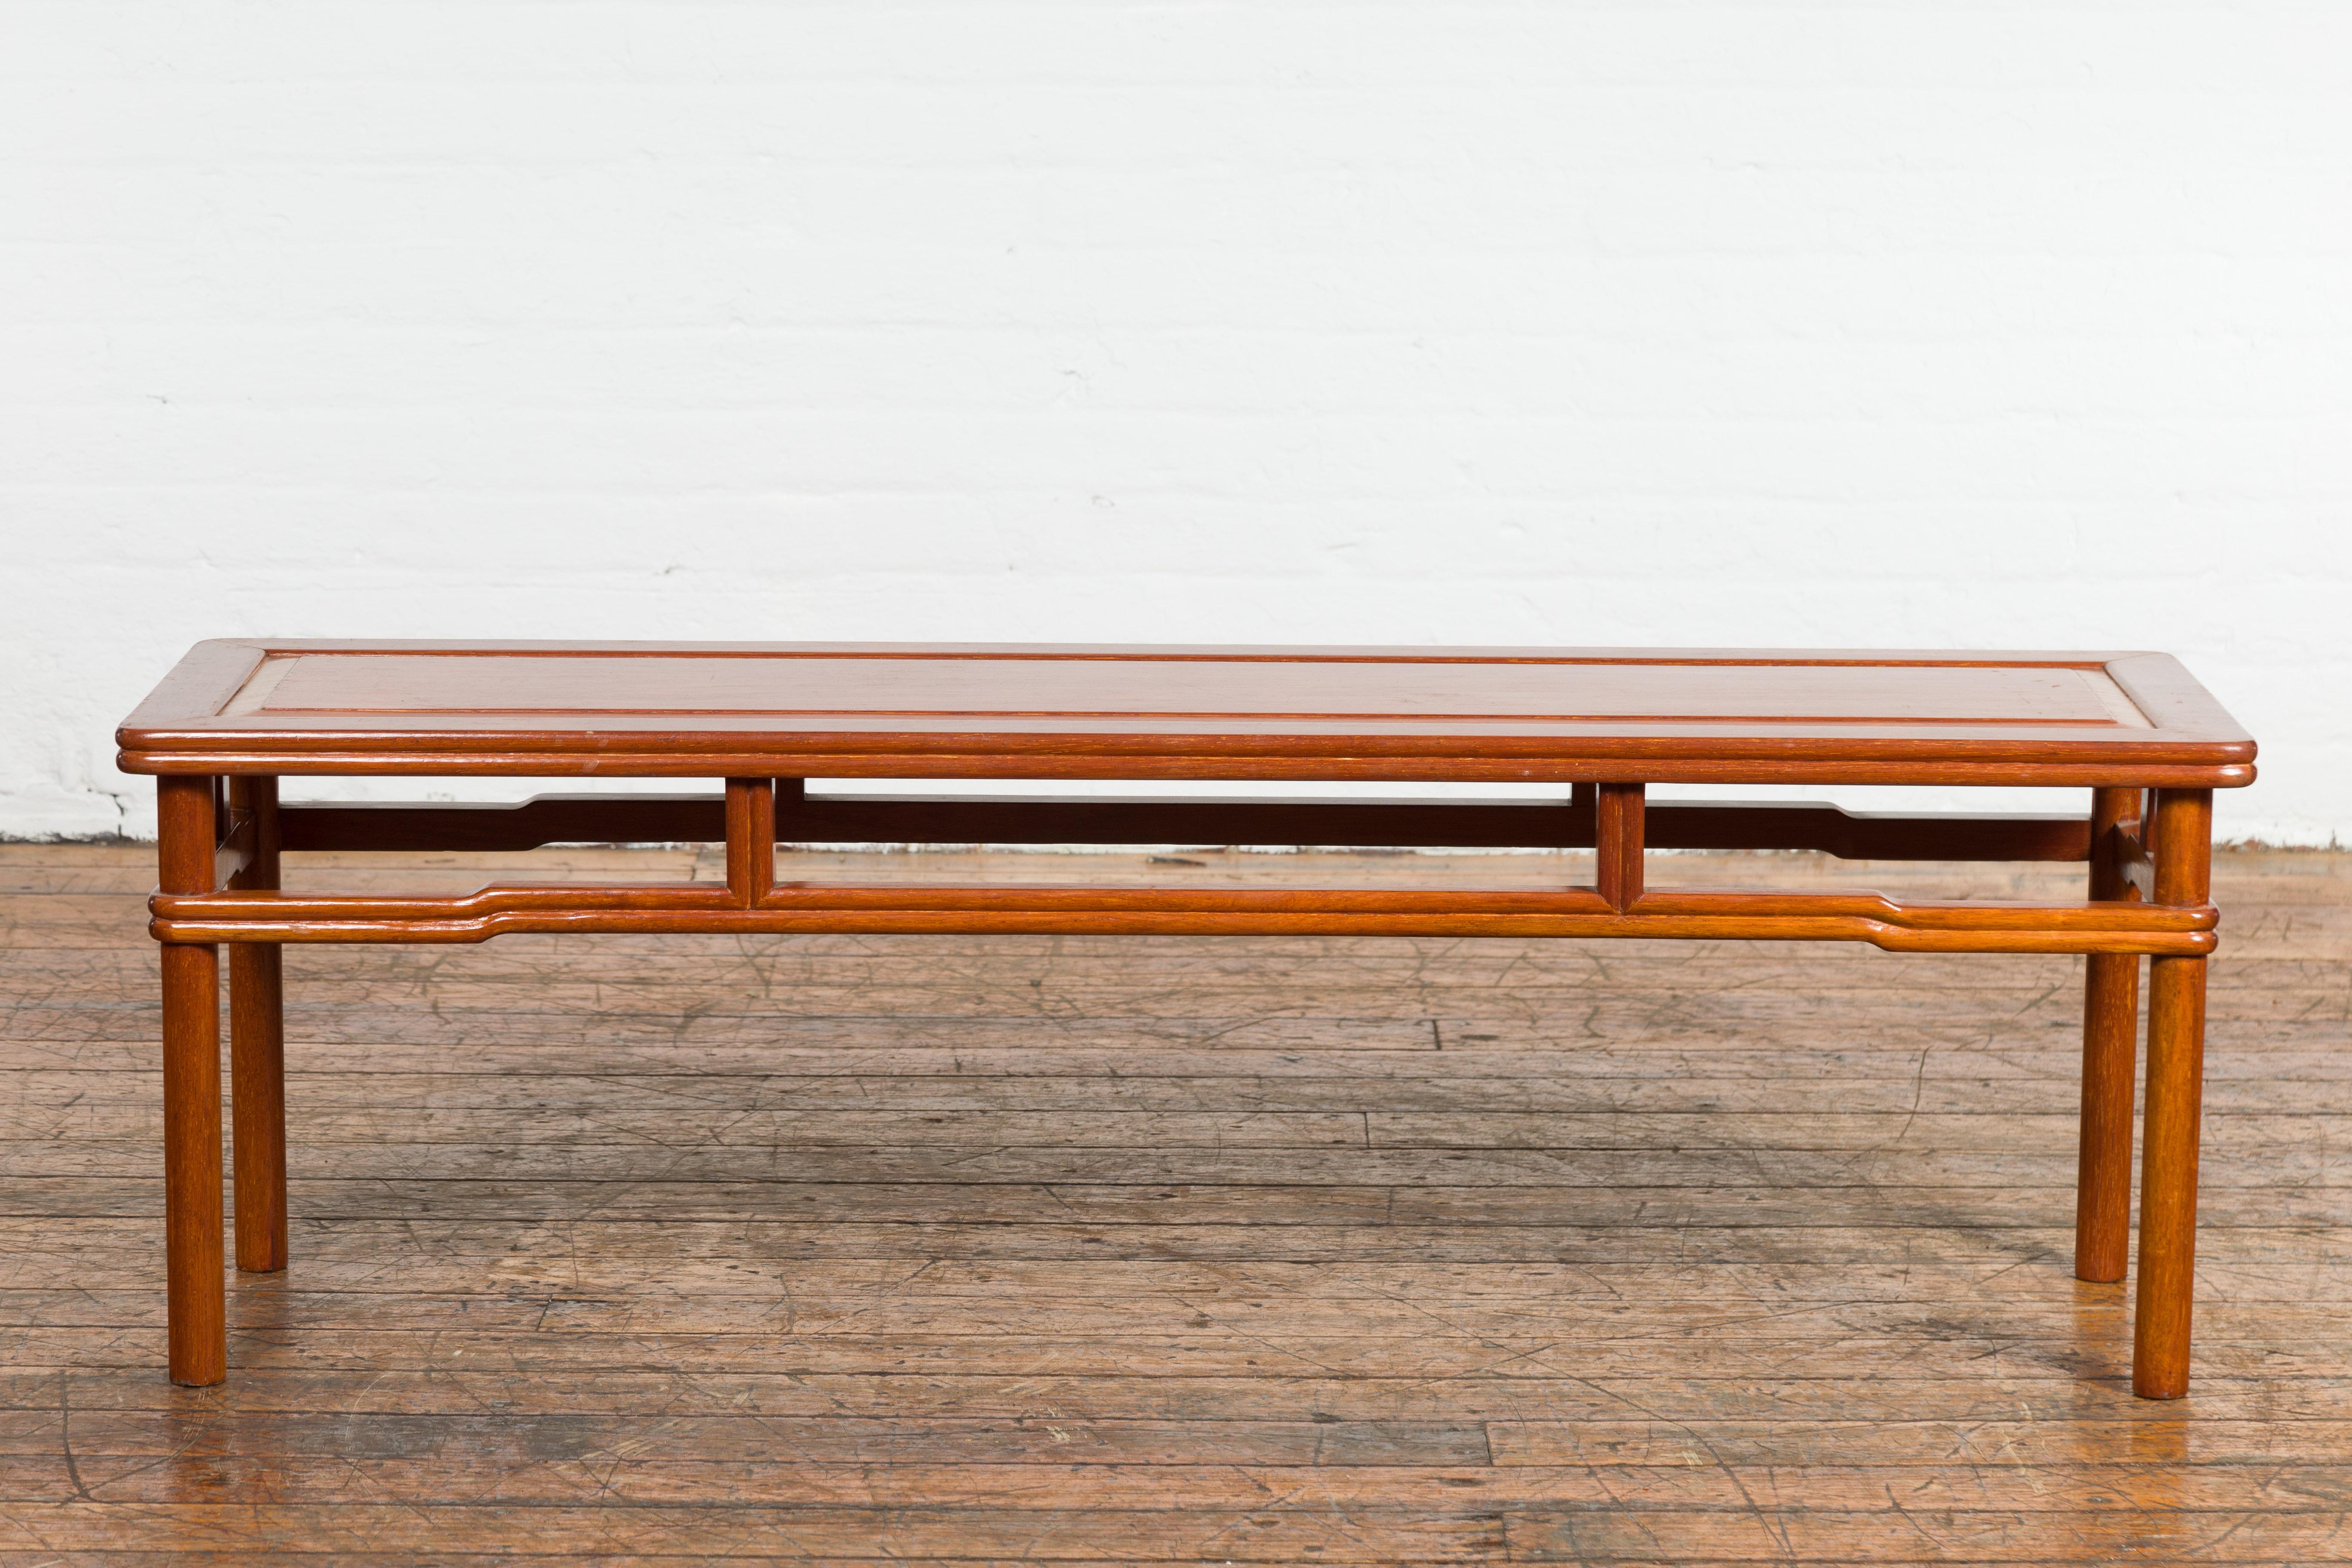 Chinese Late Qing Dynasty 1900s Low Kang Coffee Table with Humpback Stretchers For Sale 10